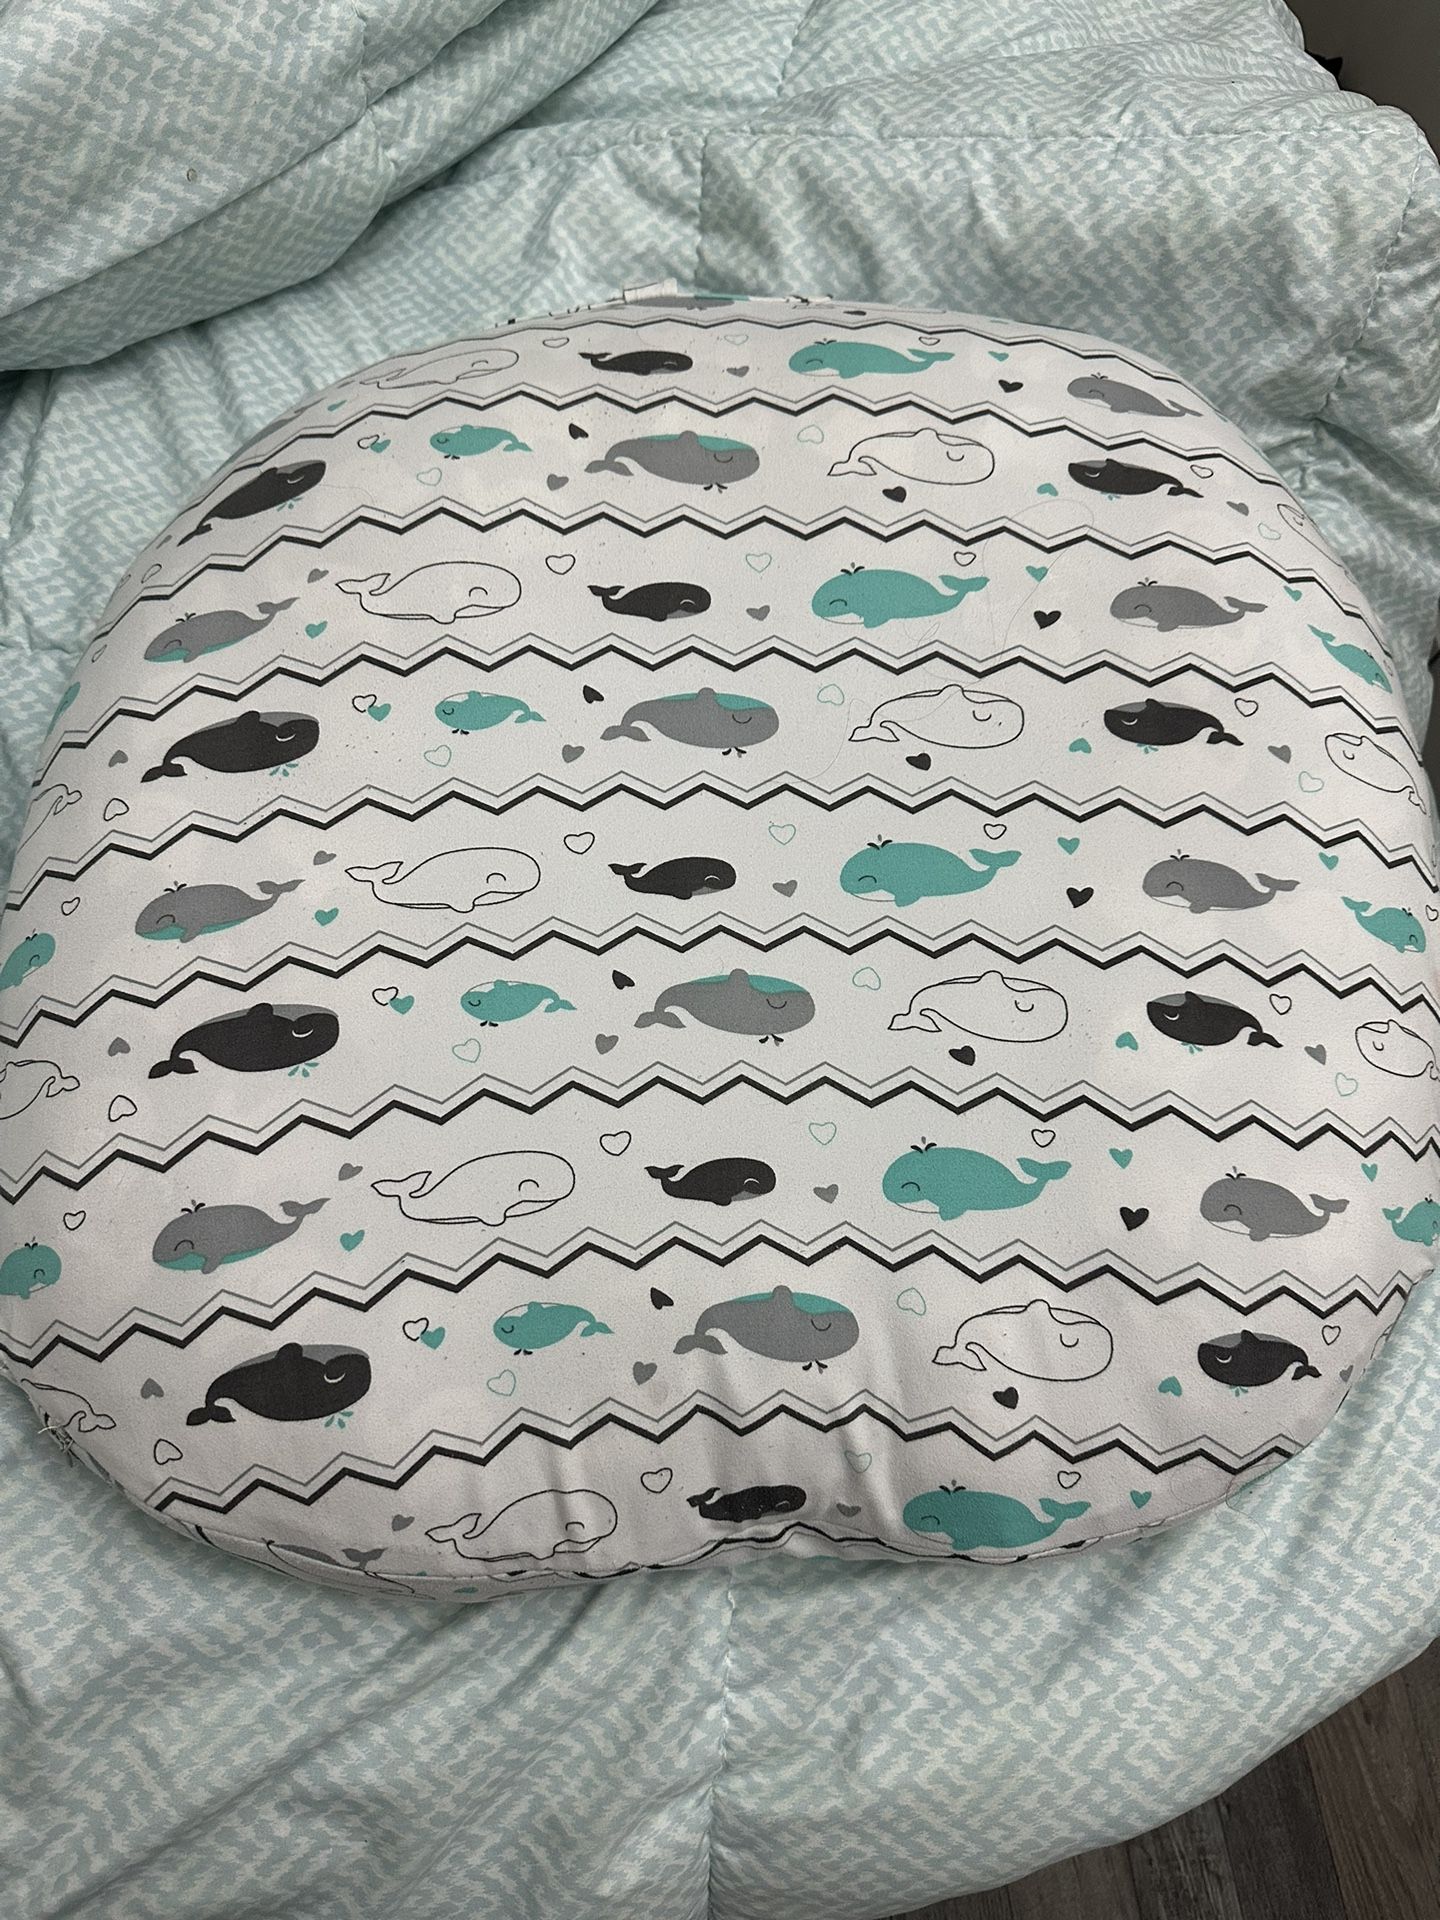 2 Nursing pillows with their covers + 1 new cover